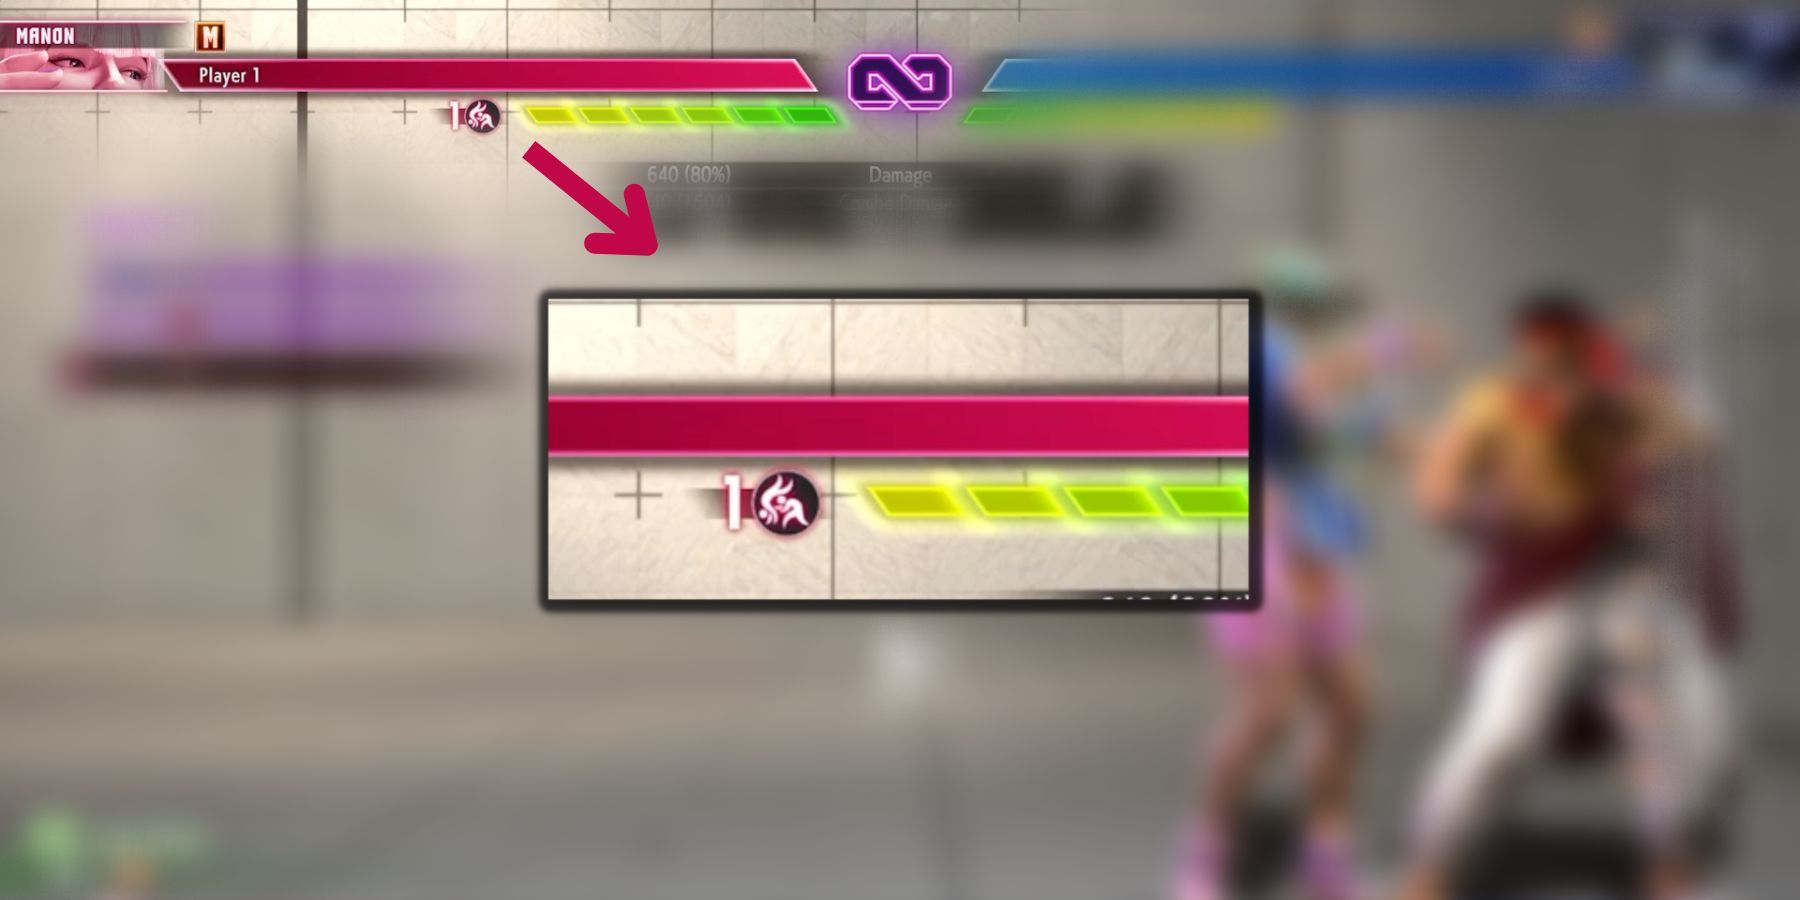 image showing manon's medal level in street fighter 6.